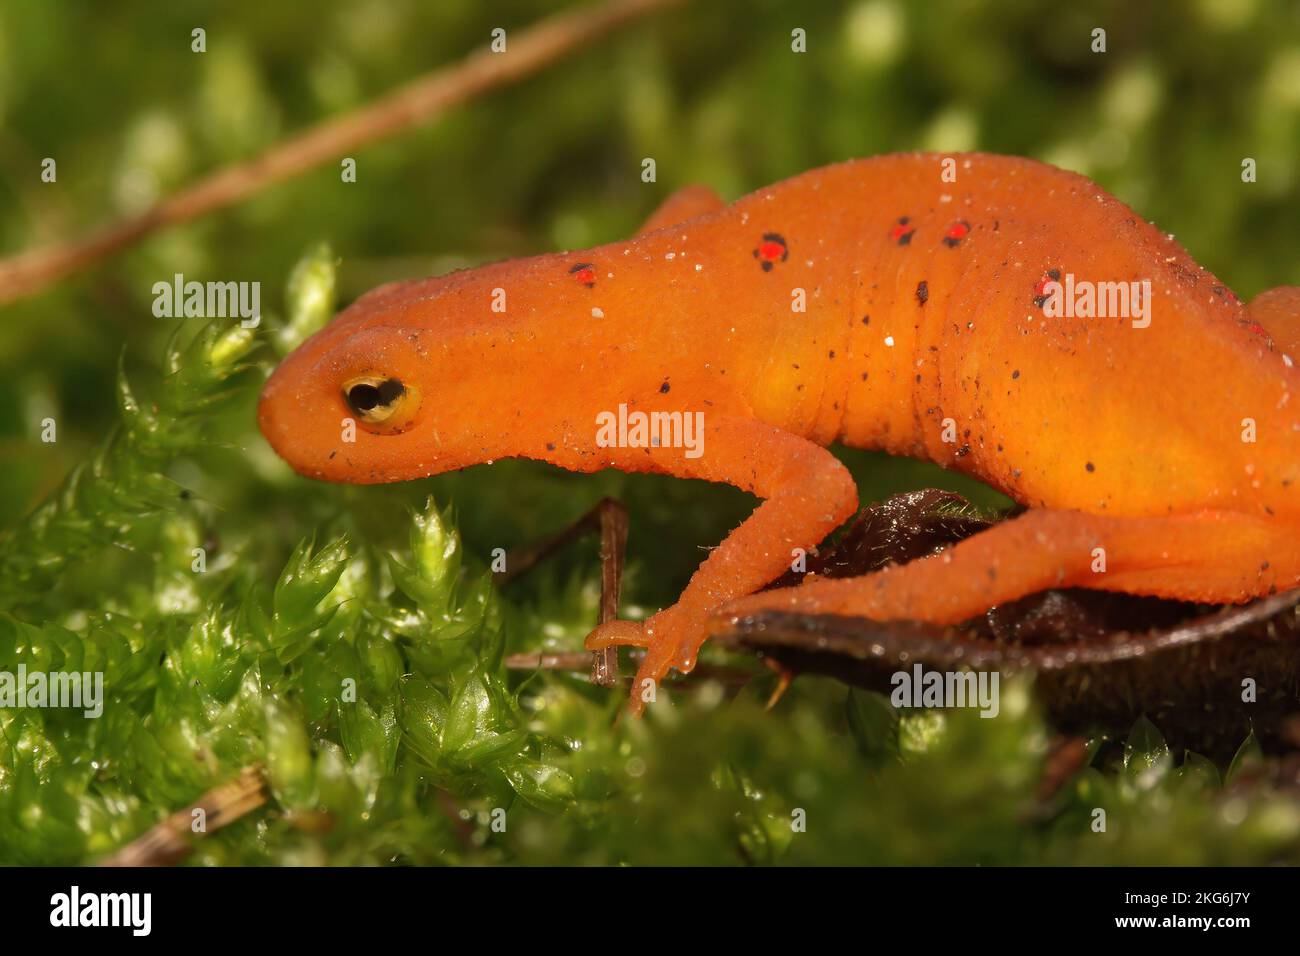 Natural closeup on a colorful red eft stage juvenile Red-spotted newt Notophthalmus viridescens sitting on moss Stock Photo